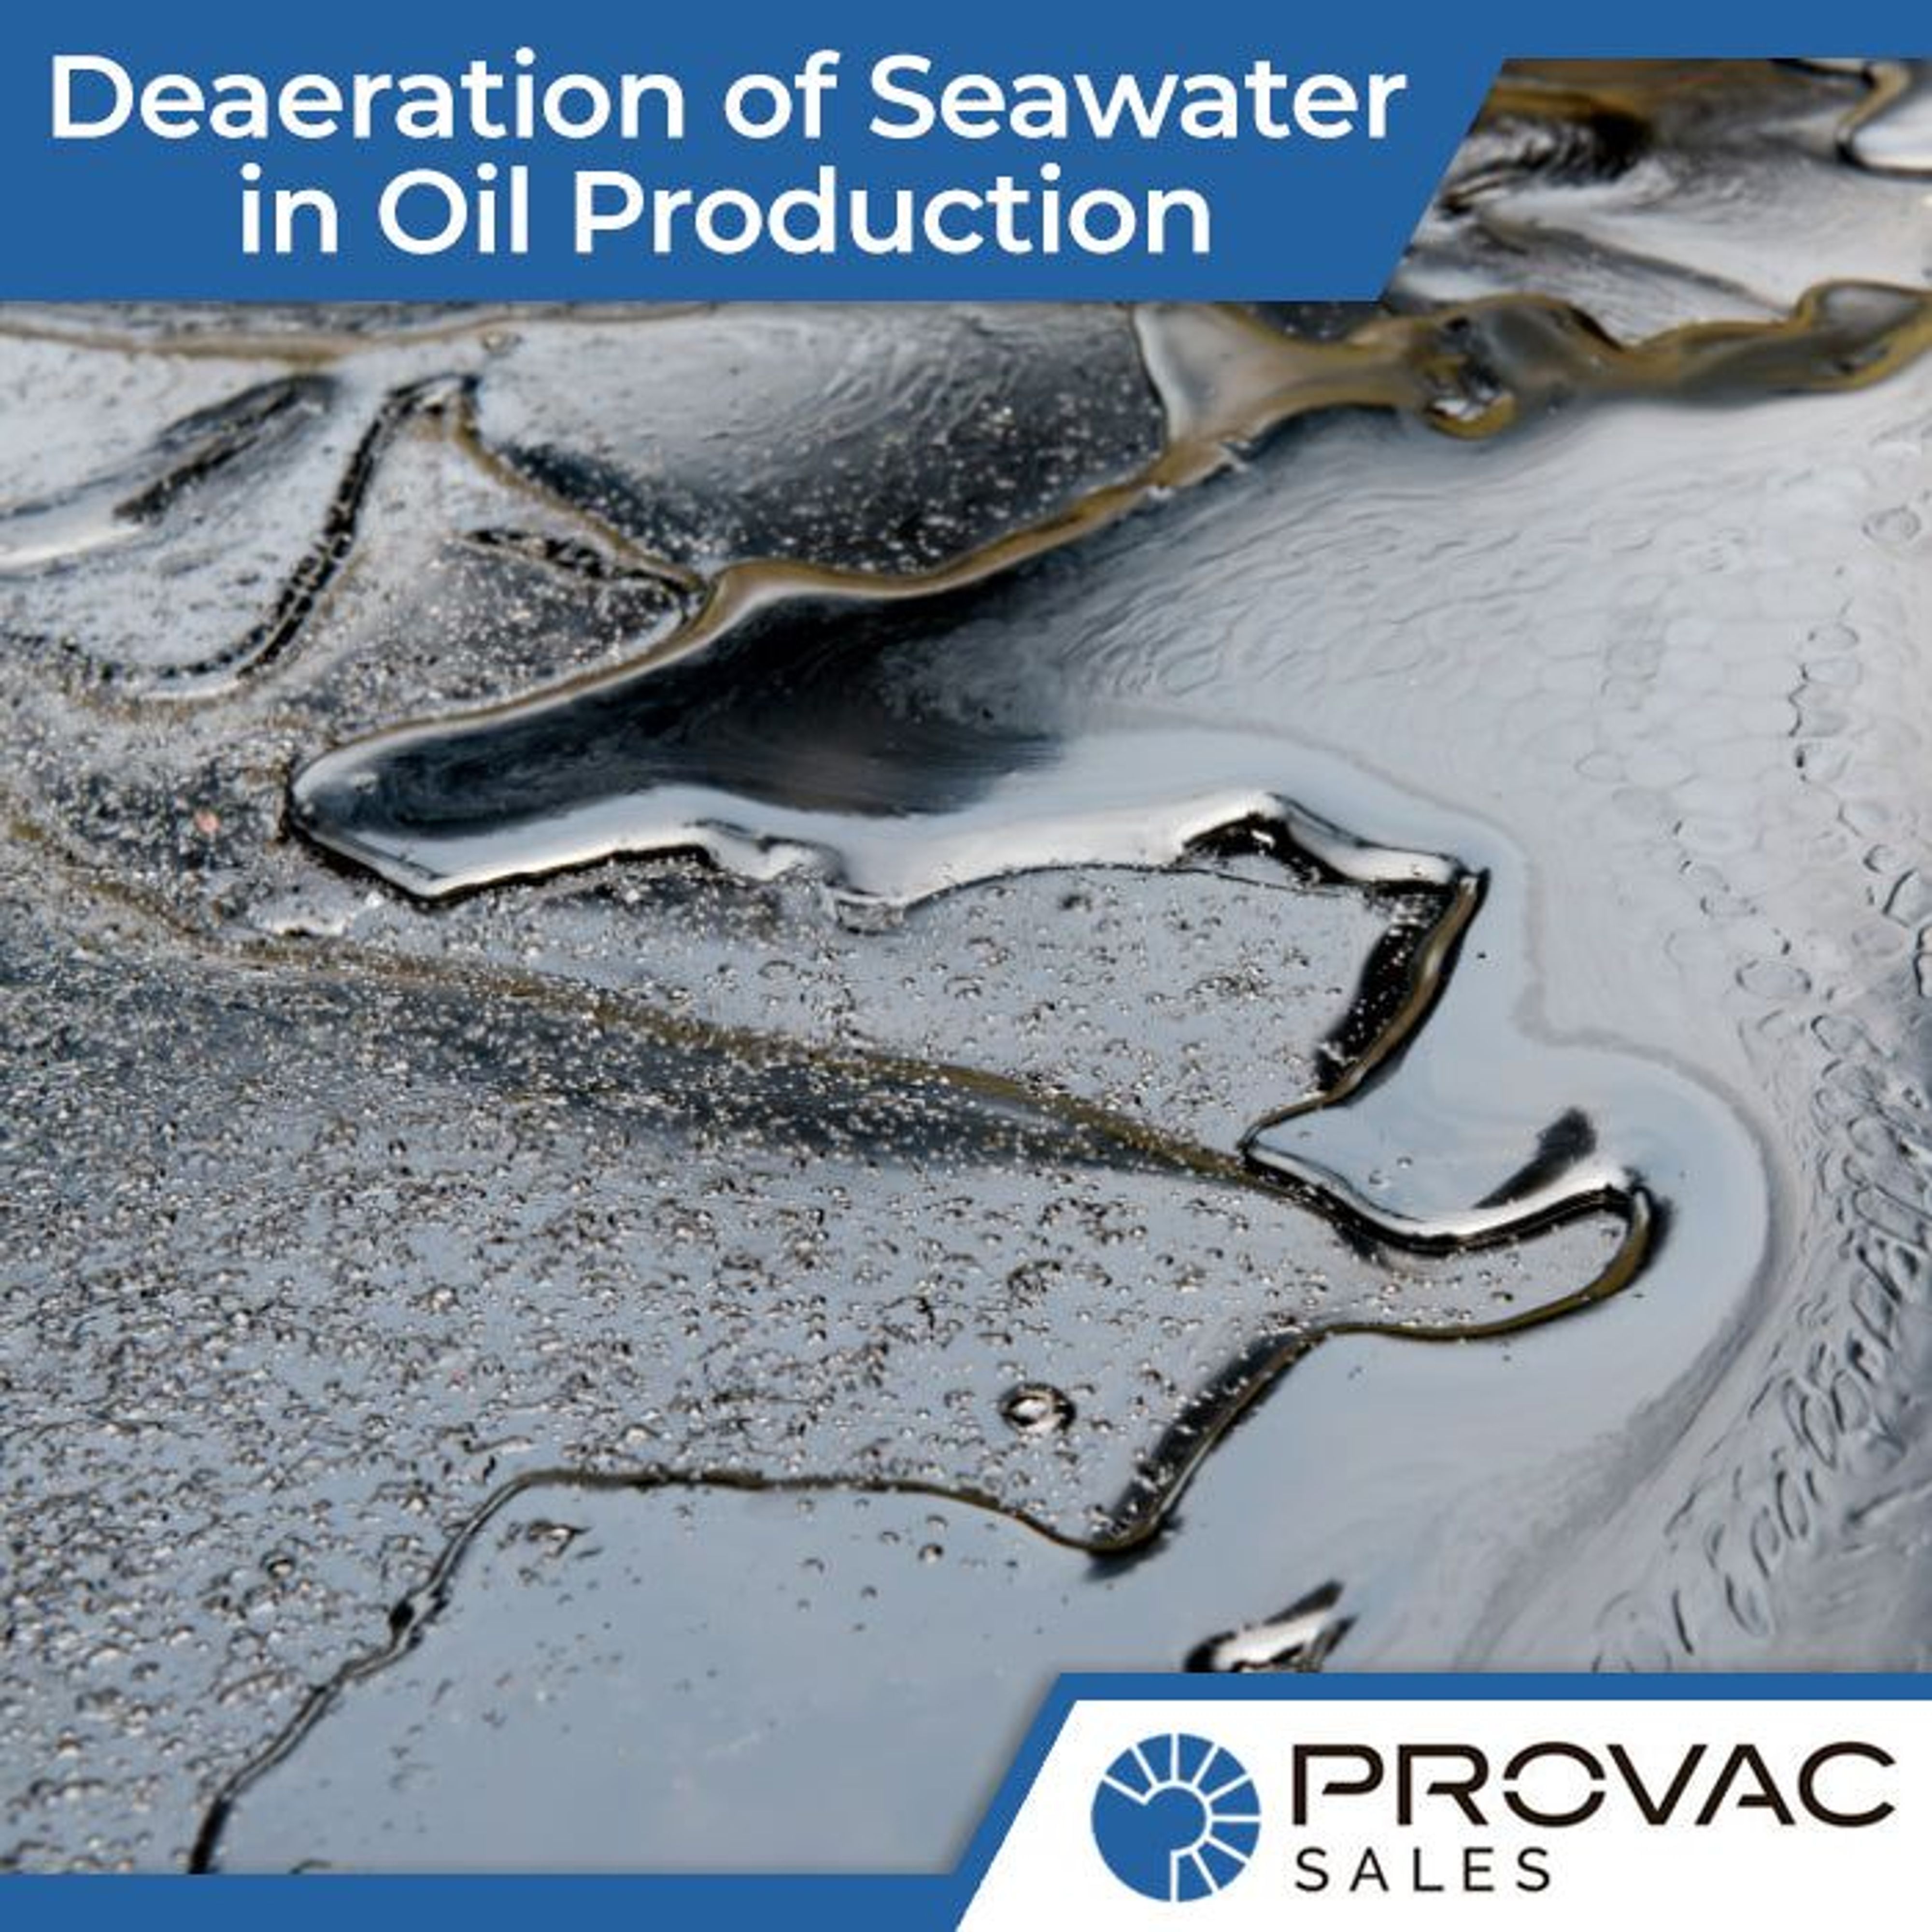 The Process of Deaeration of Seawater in Oil Production Background